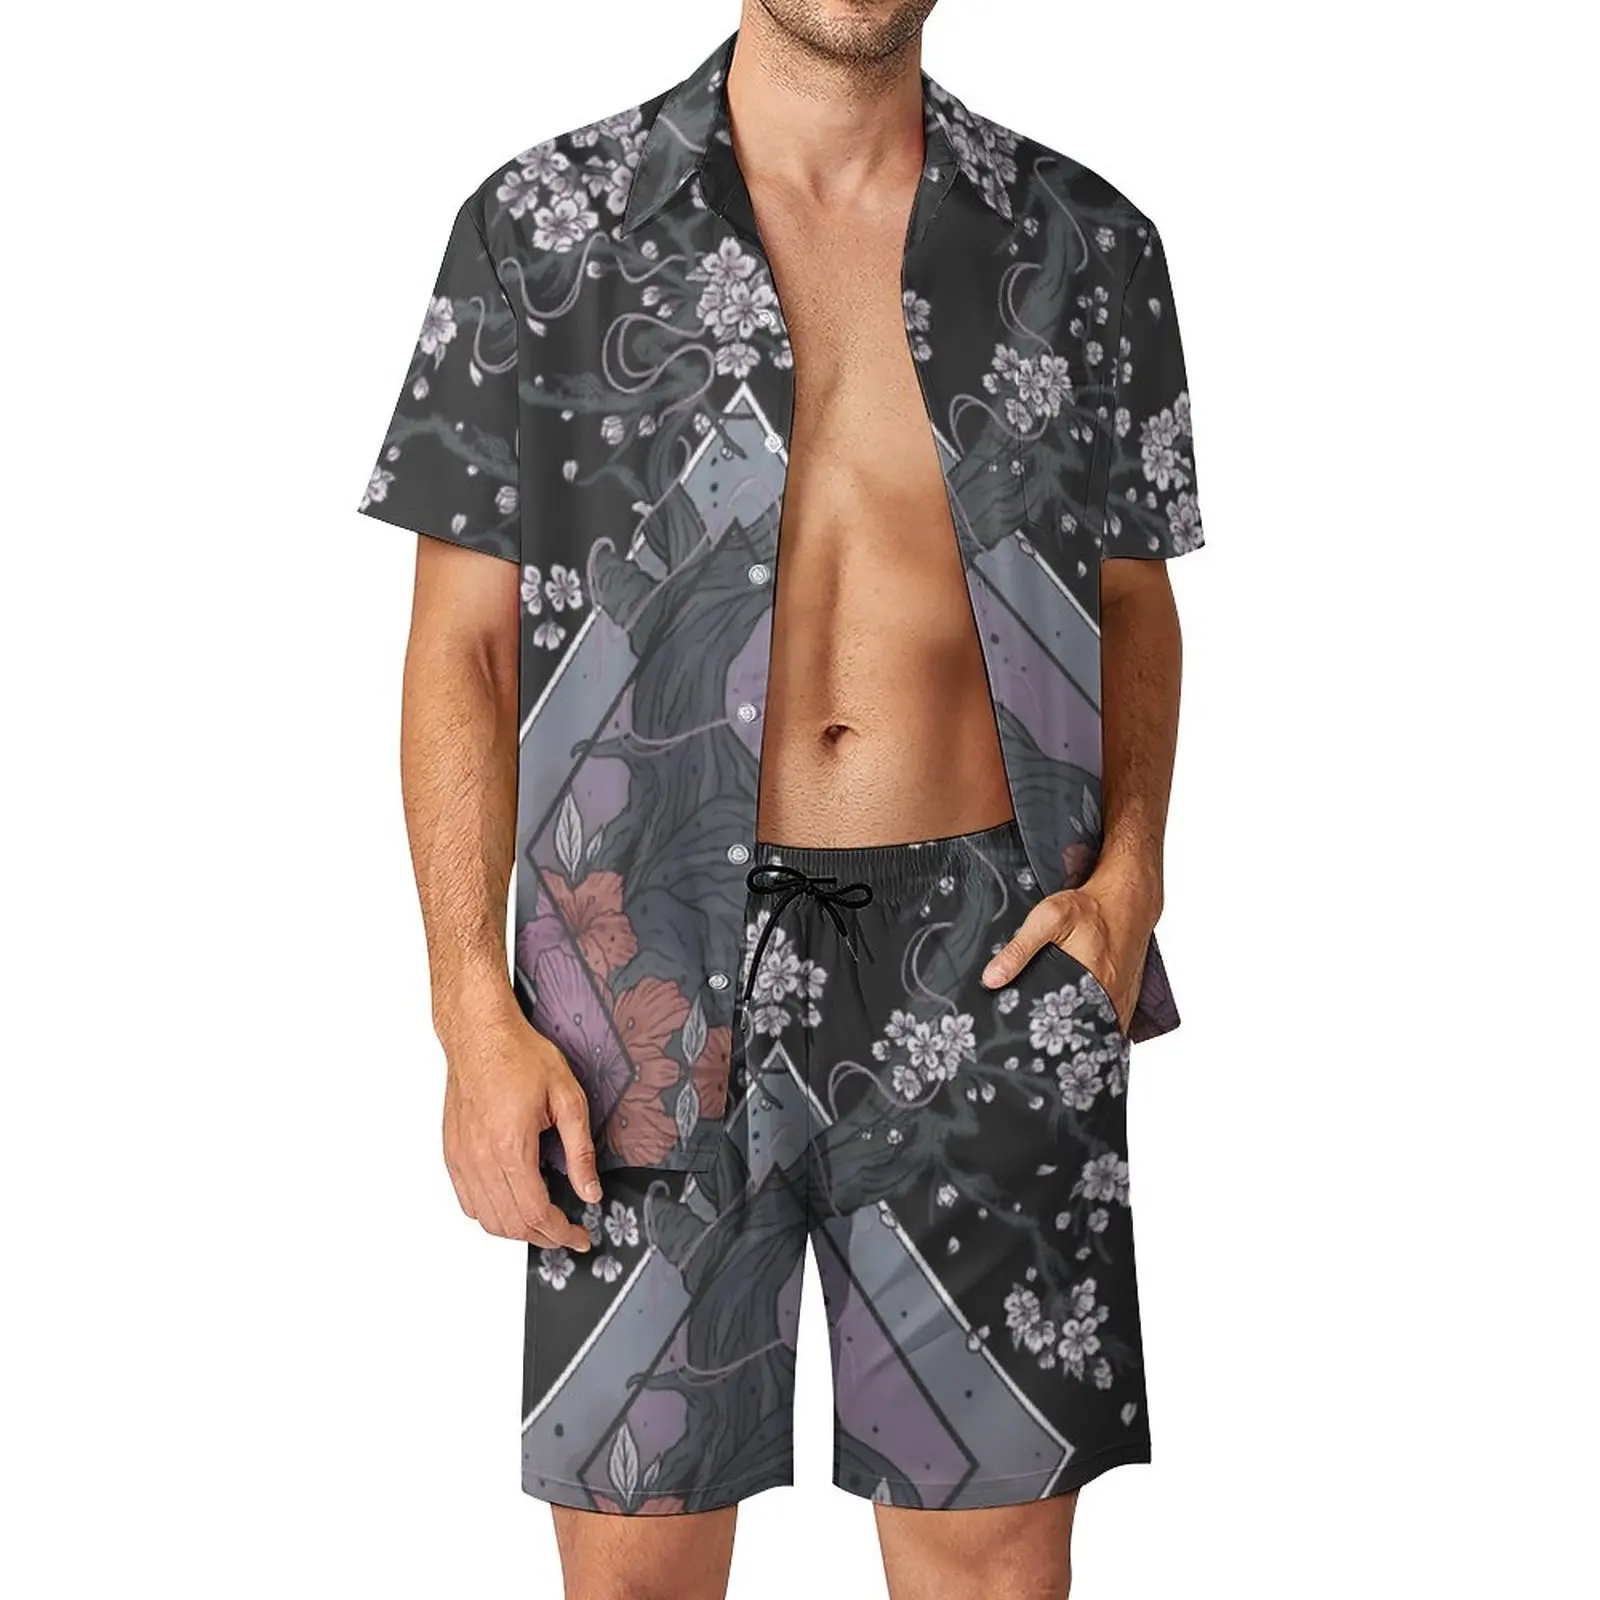 

Magical Bonsai Men's Beach Suit Funny 2 Pieces Pantdress High Quality Going Out USA Size